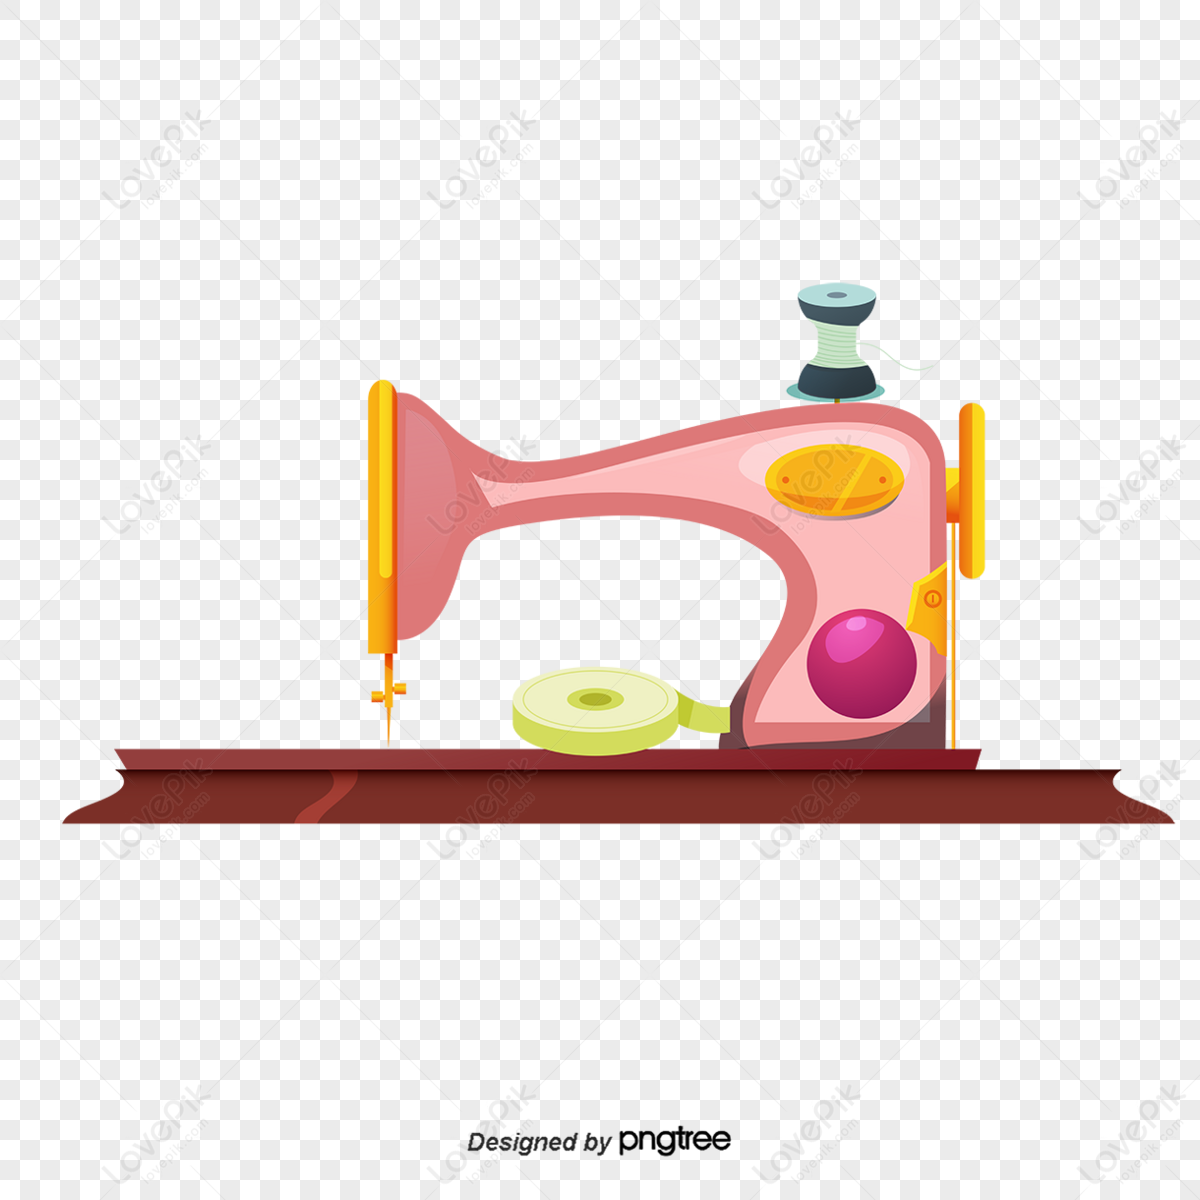 Male dressmaker sewing pink dress Royalty Free Vector Image